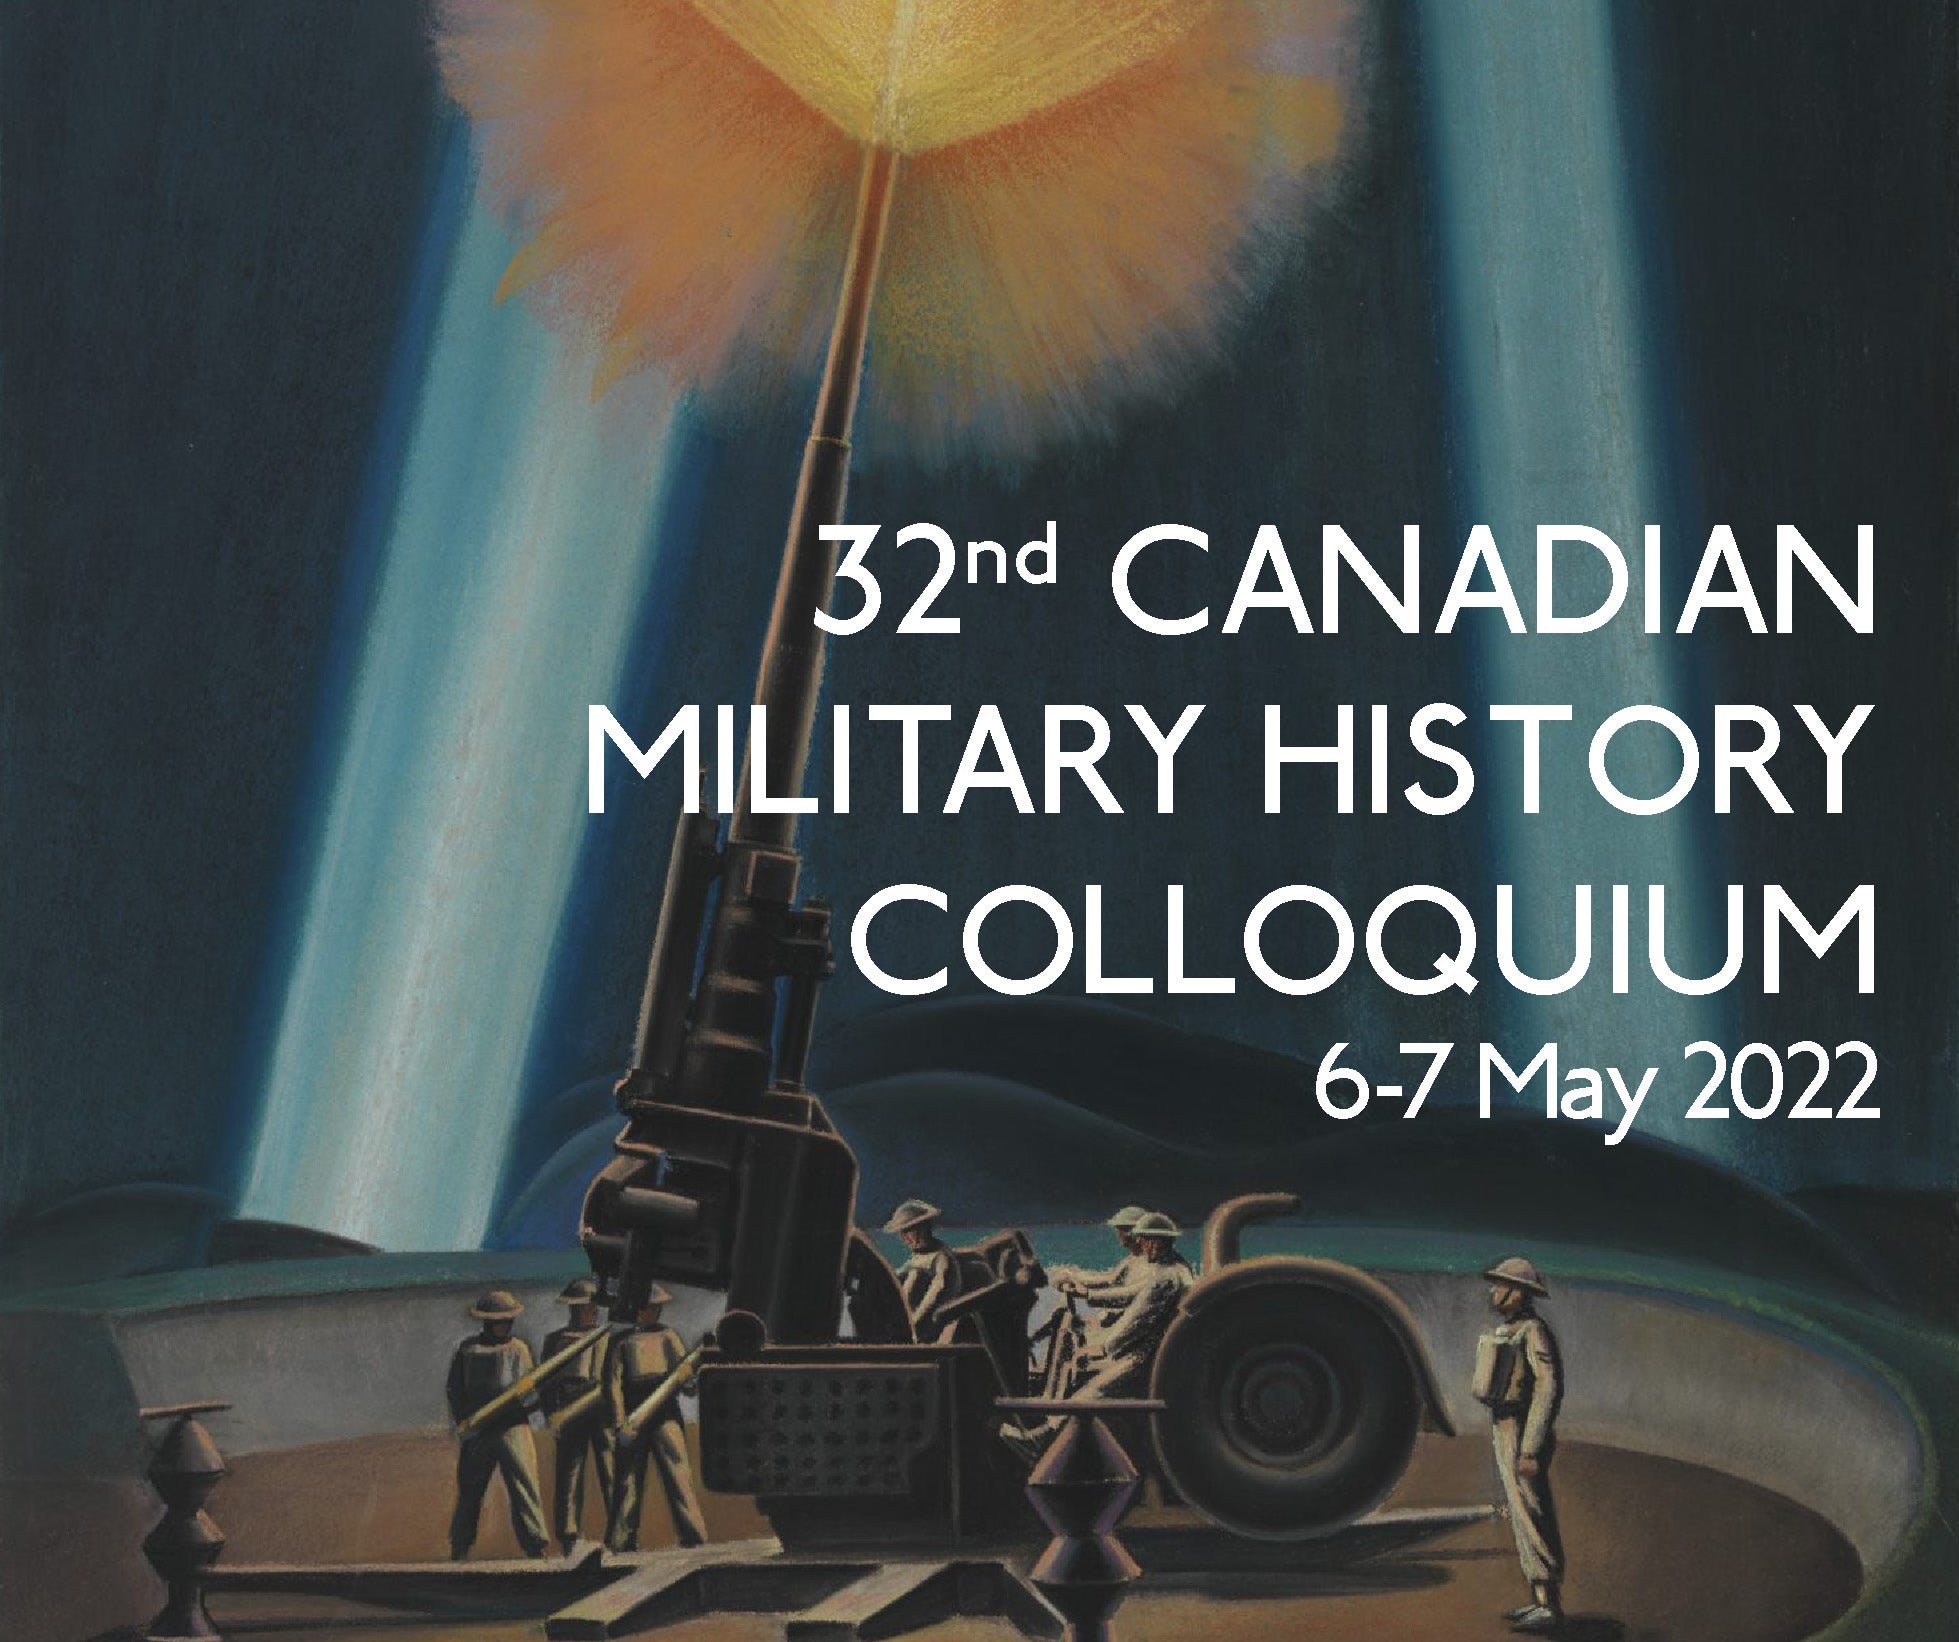 Painting of soldiers firing a tank with the title 32nd Canadian Military History Colloquium 6-7 May added